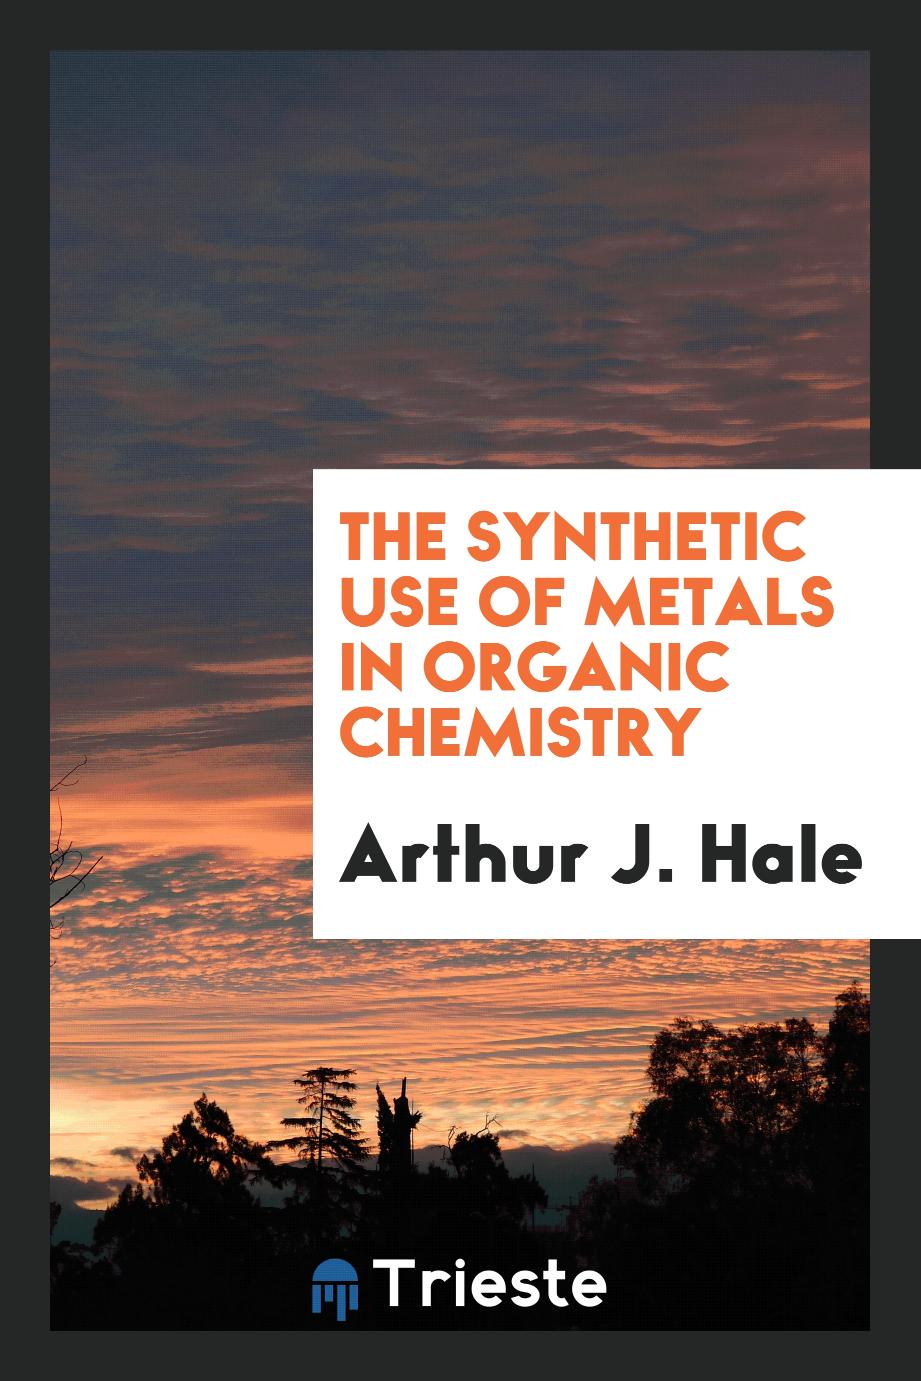 The Synthetic Use of Metals in Organic Chemistry